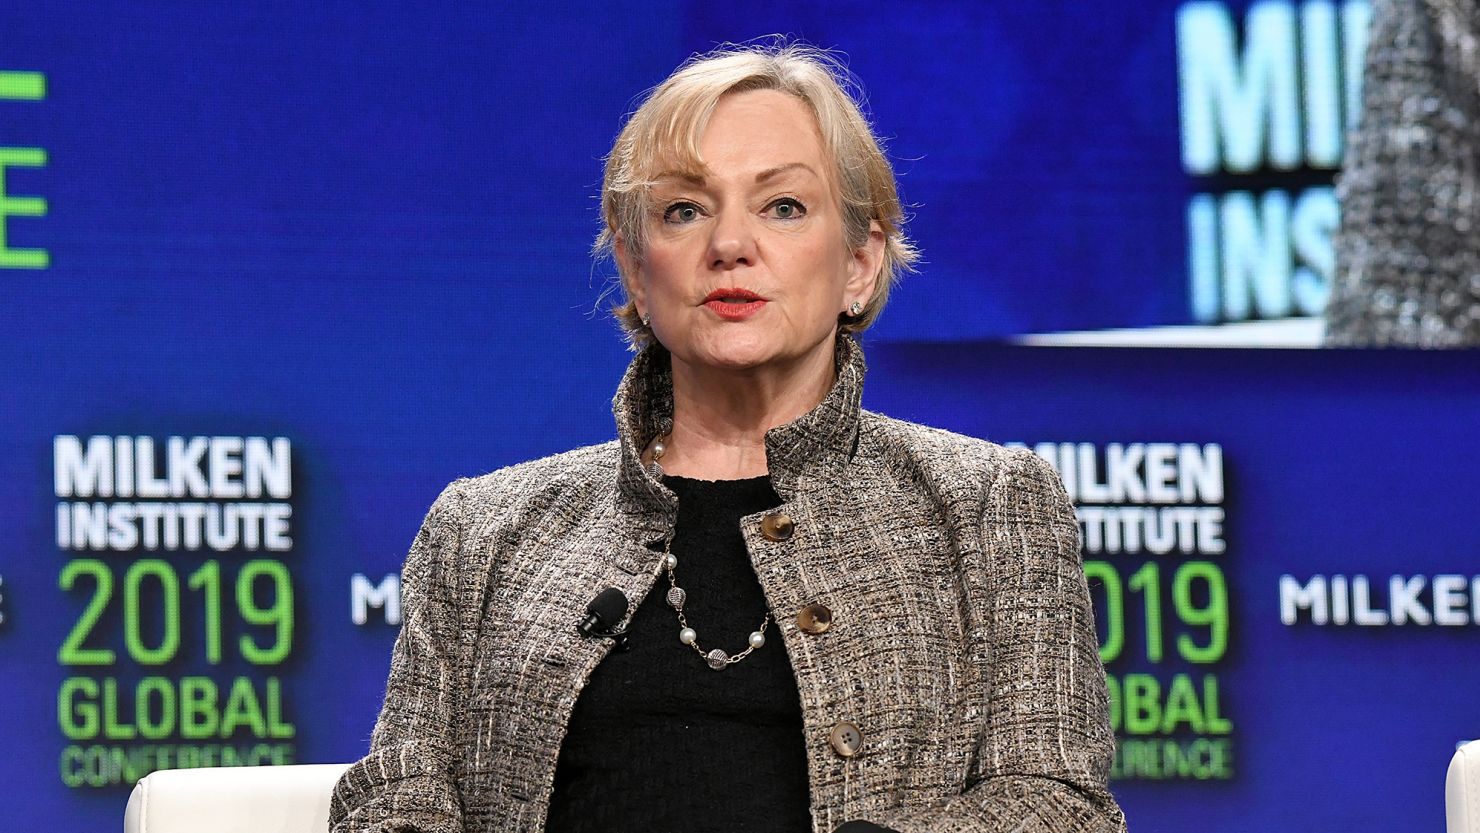 Christine McCarthy, Senior Executive Vice President and Chief Financial Officer, The Walt Disney Company, participates in a panel discussion during the annual Milken Institute Global Conference at The Beverly Hilton Hotel on April 29, 2019 in Beverly Hills, California.  